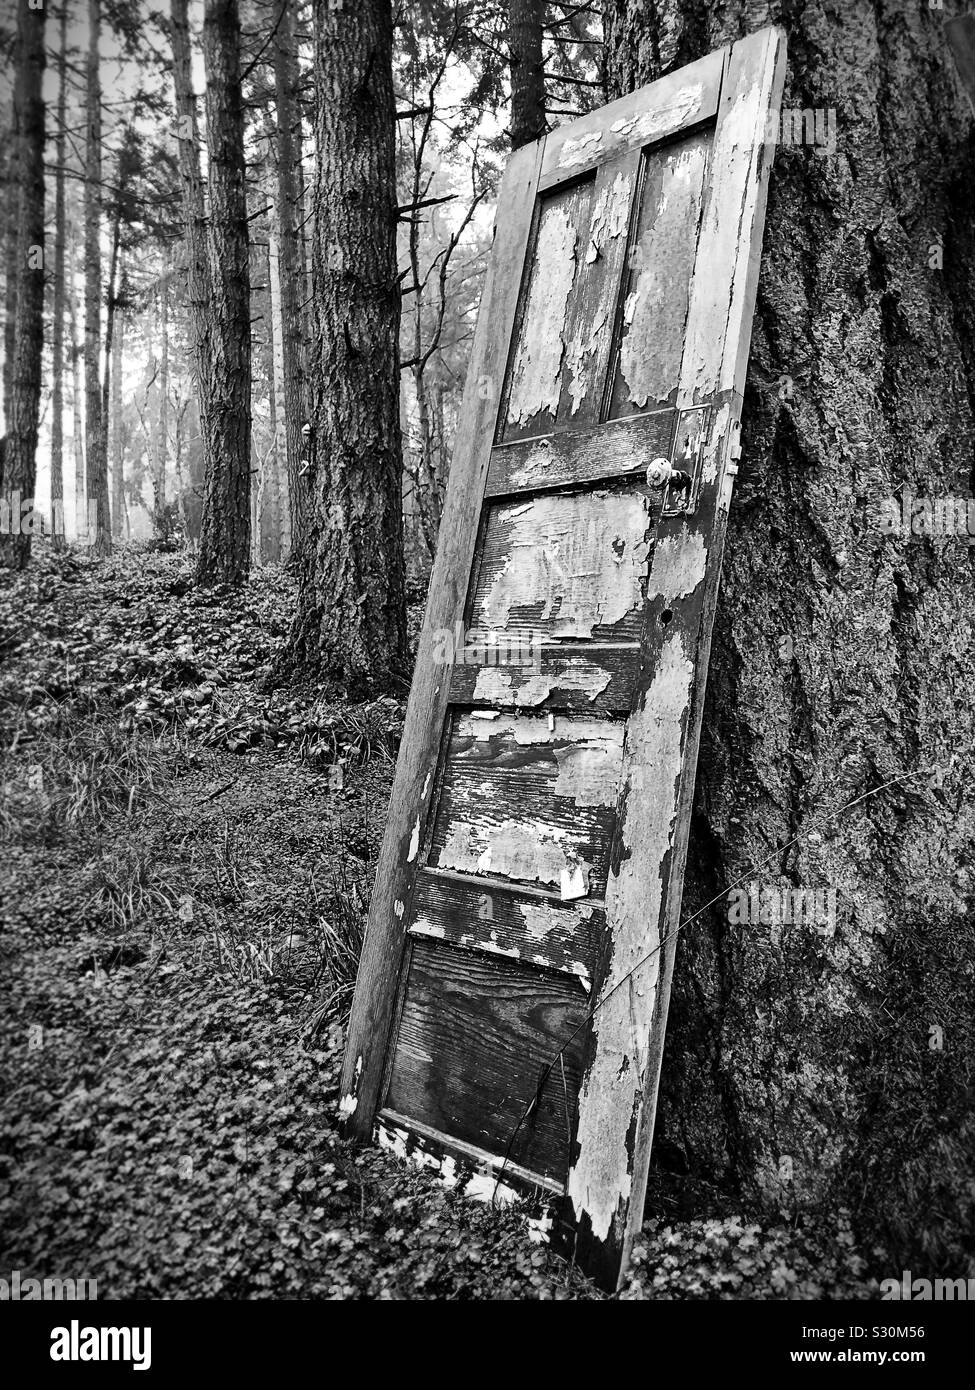 An old door with peeling paint leaning against a tree in a forest. Stock Photo